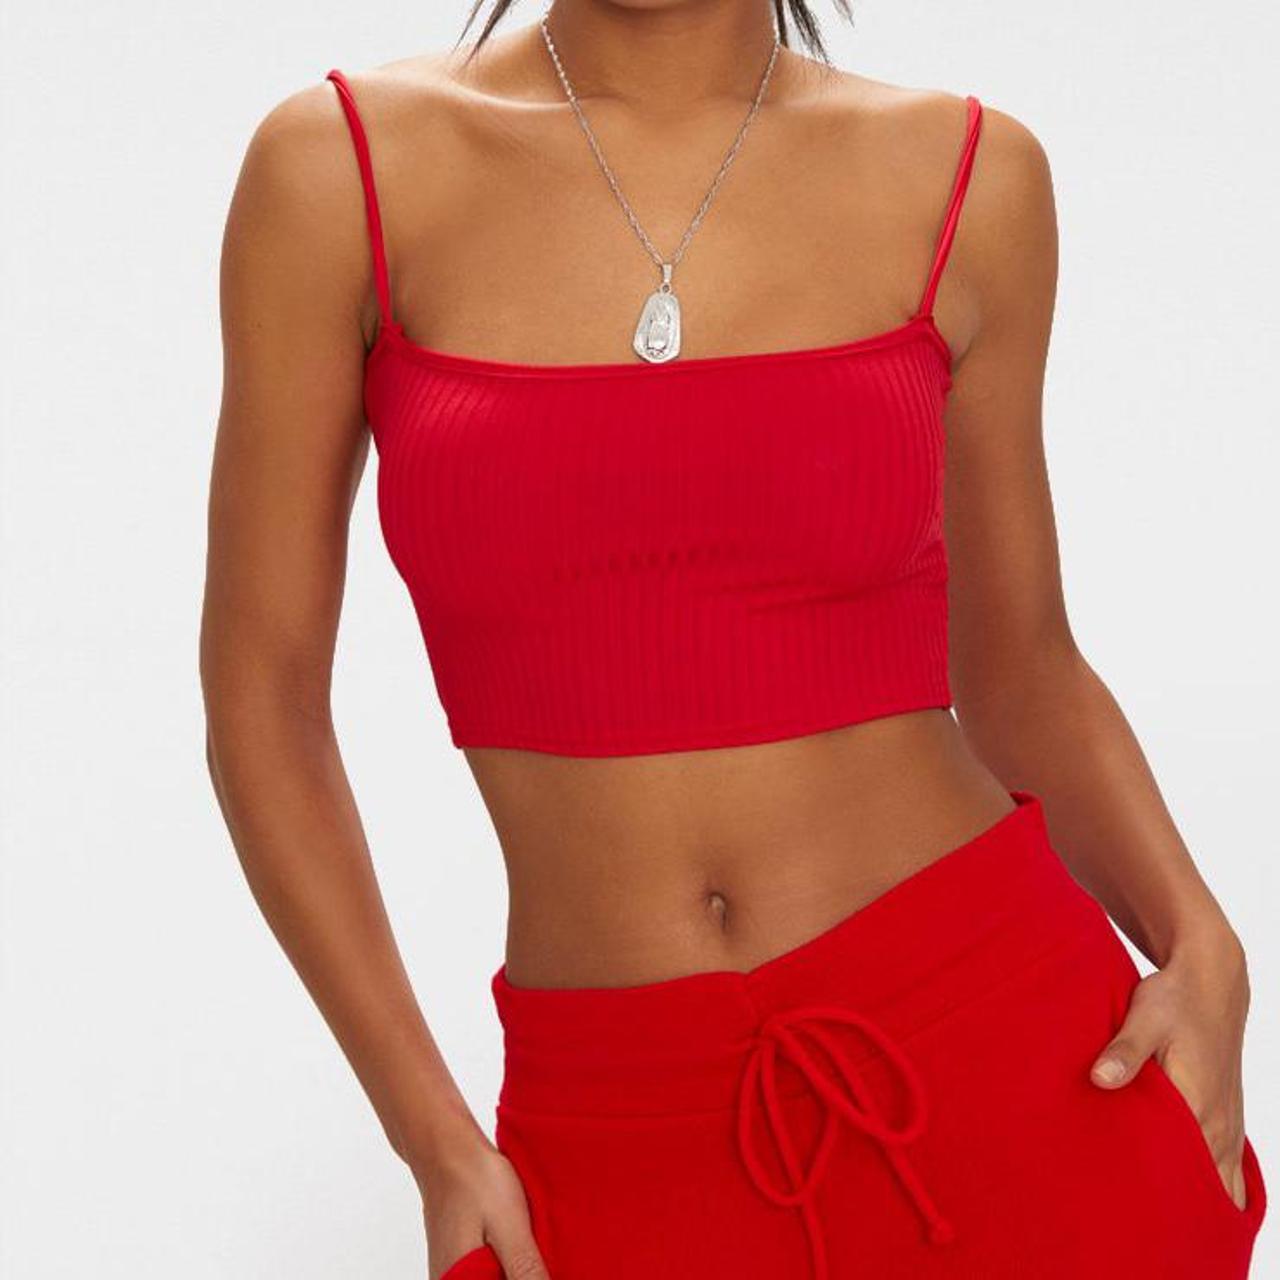 Product Image 1 - Red ribbed bandeau crop top
PLT
Size